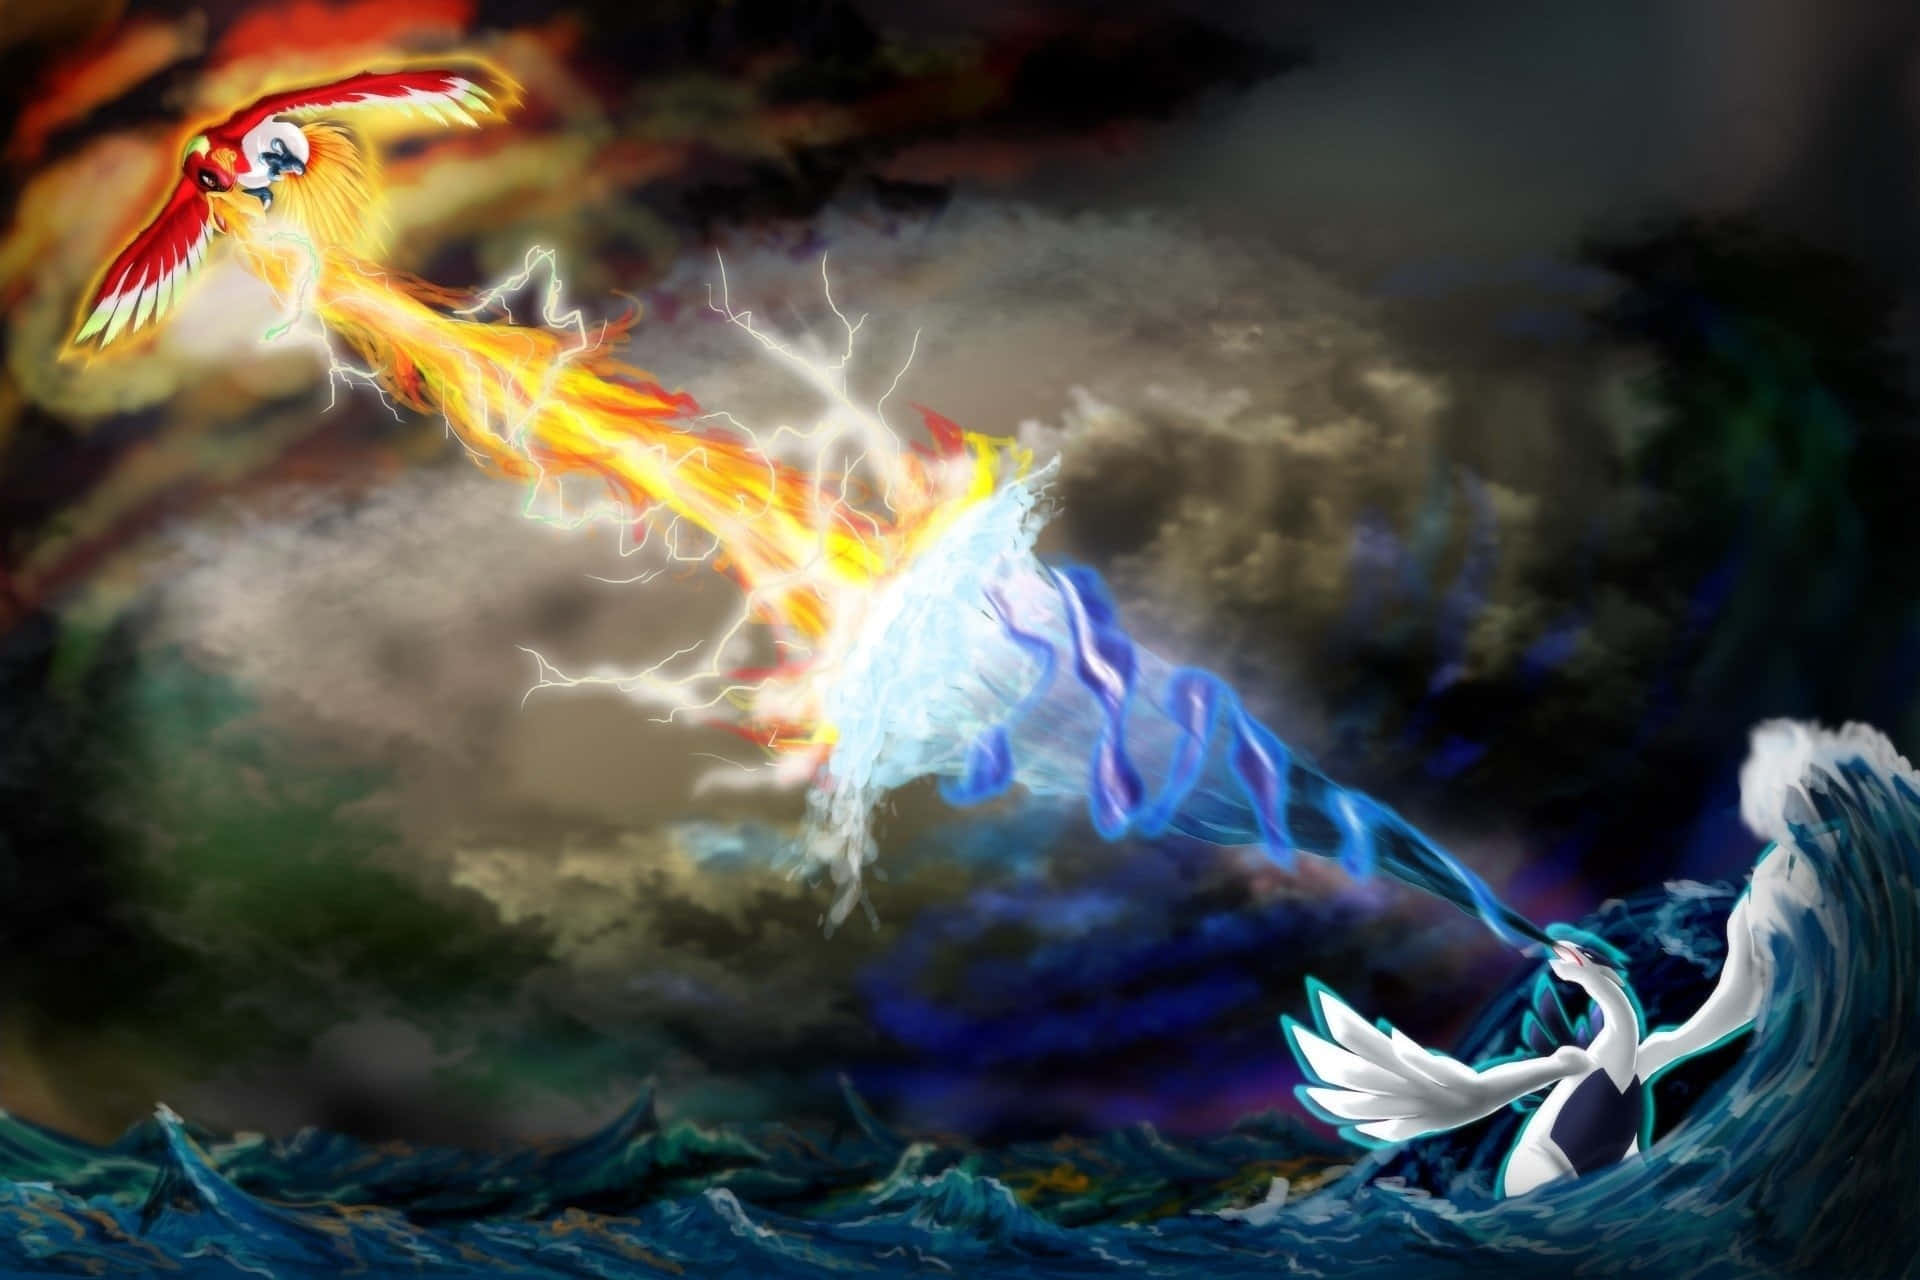 "A mysterious and powerful Lugia in flight."